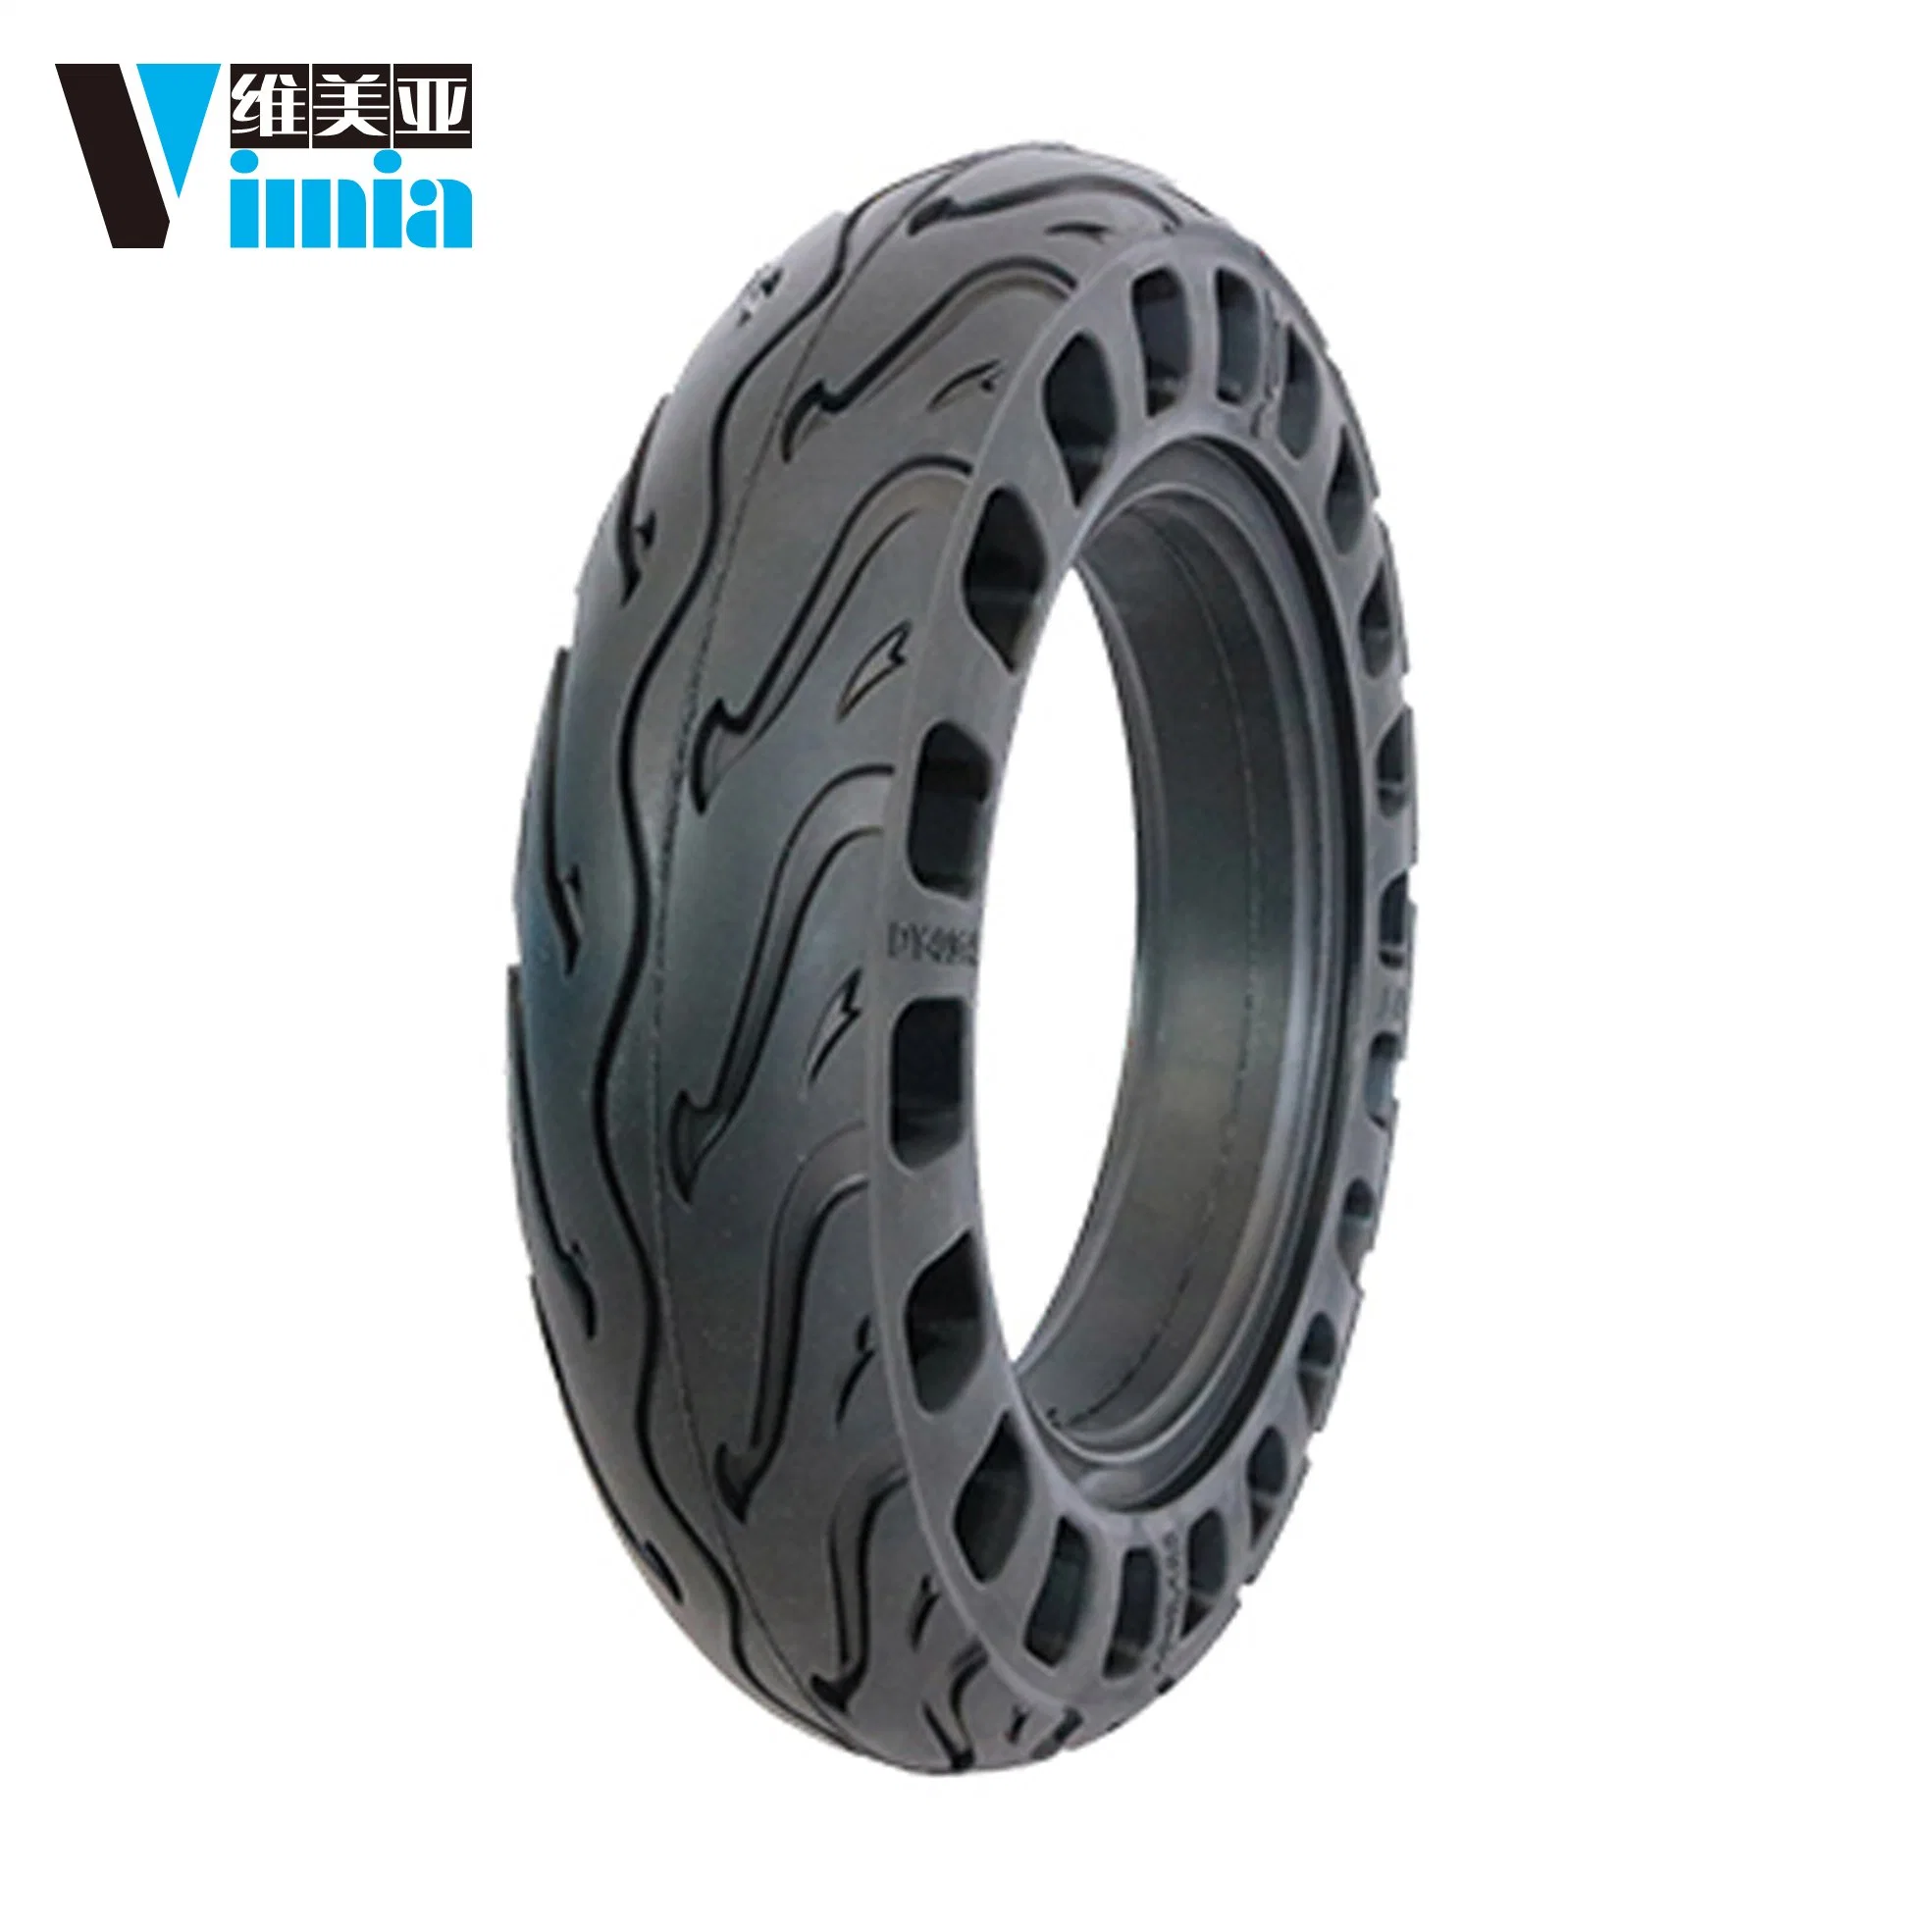 Scooter Solid Tires Black Tires 10X2.125 Non-Inflation Tires